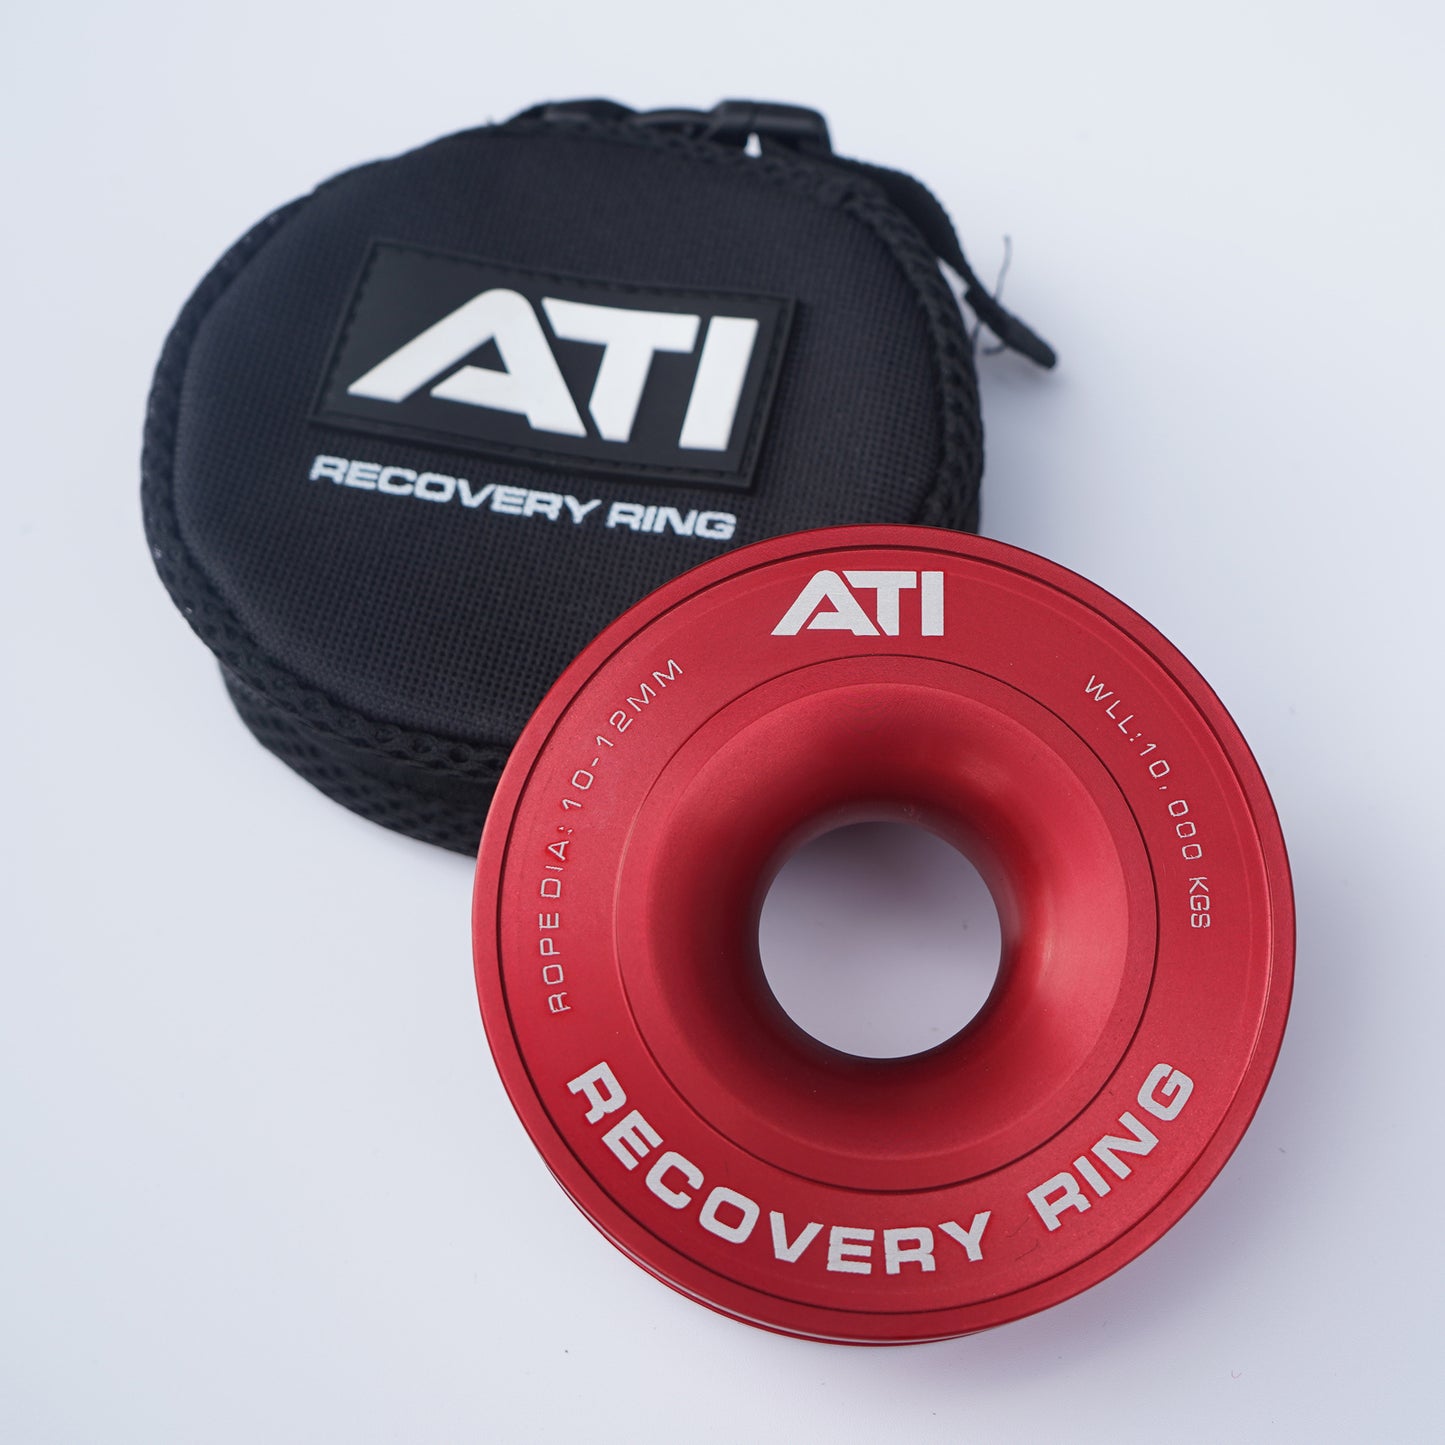 ATI 10,000KG ALLOY RECOVERY RING